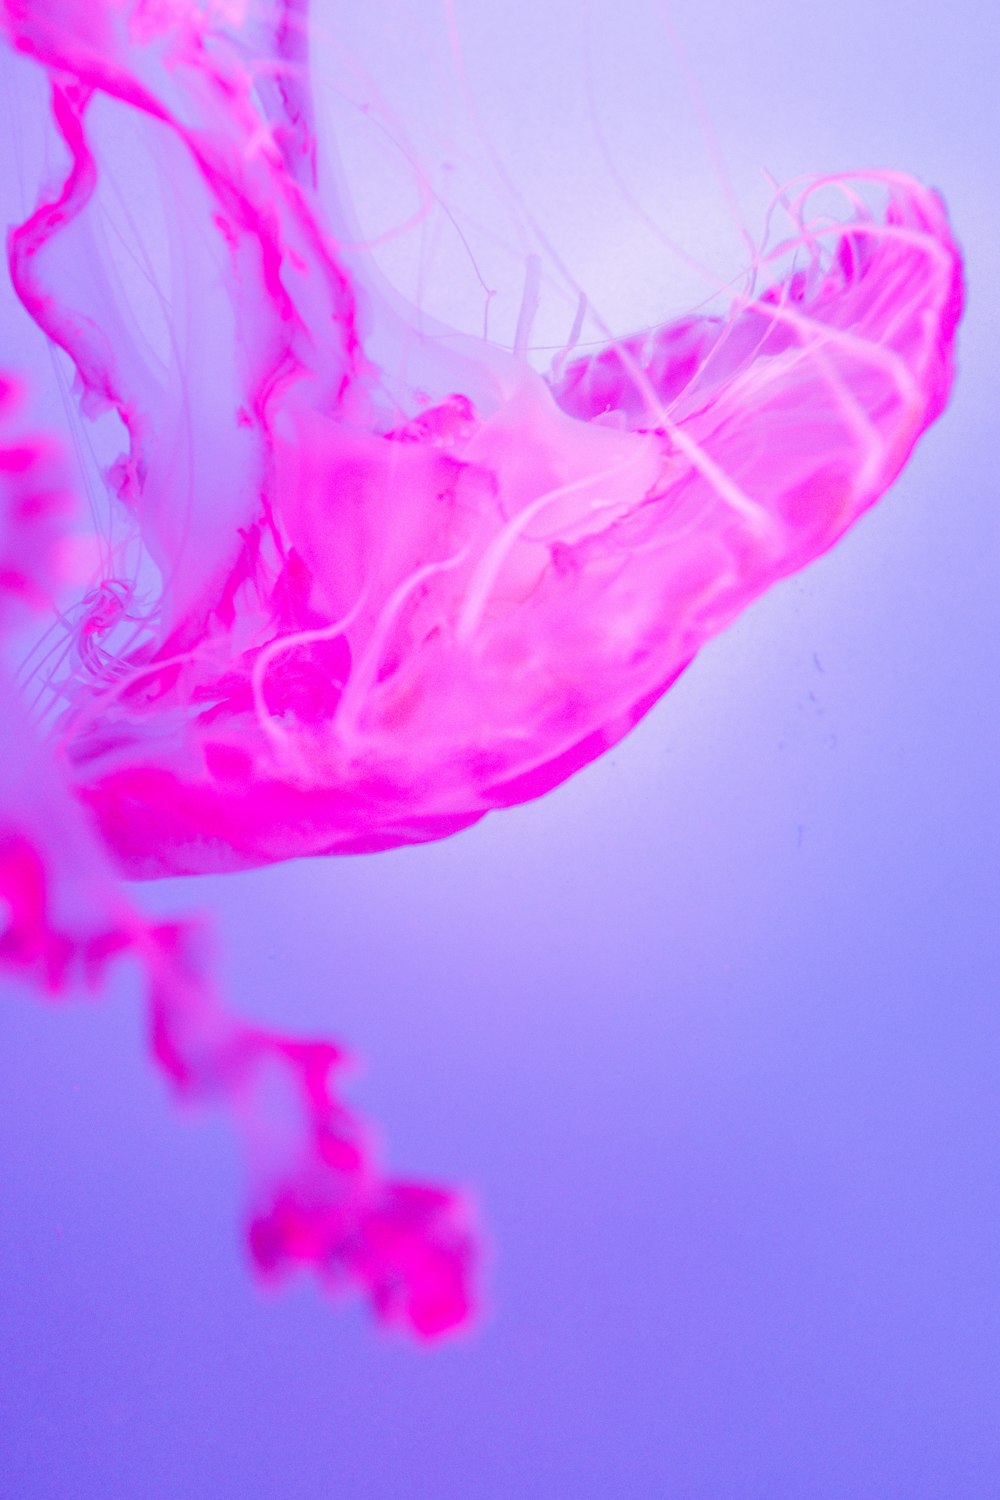 a pink jellyfish floating in the water